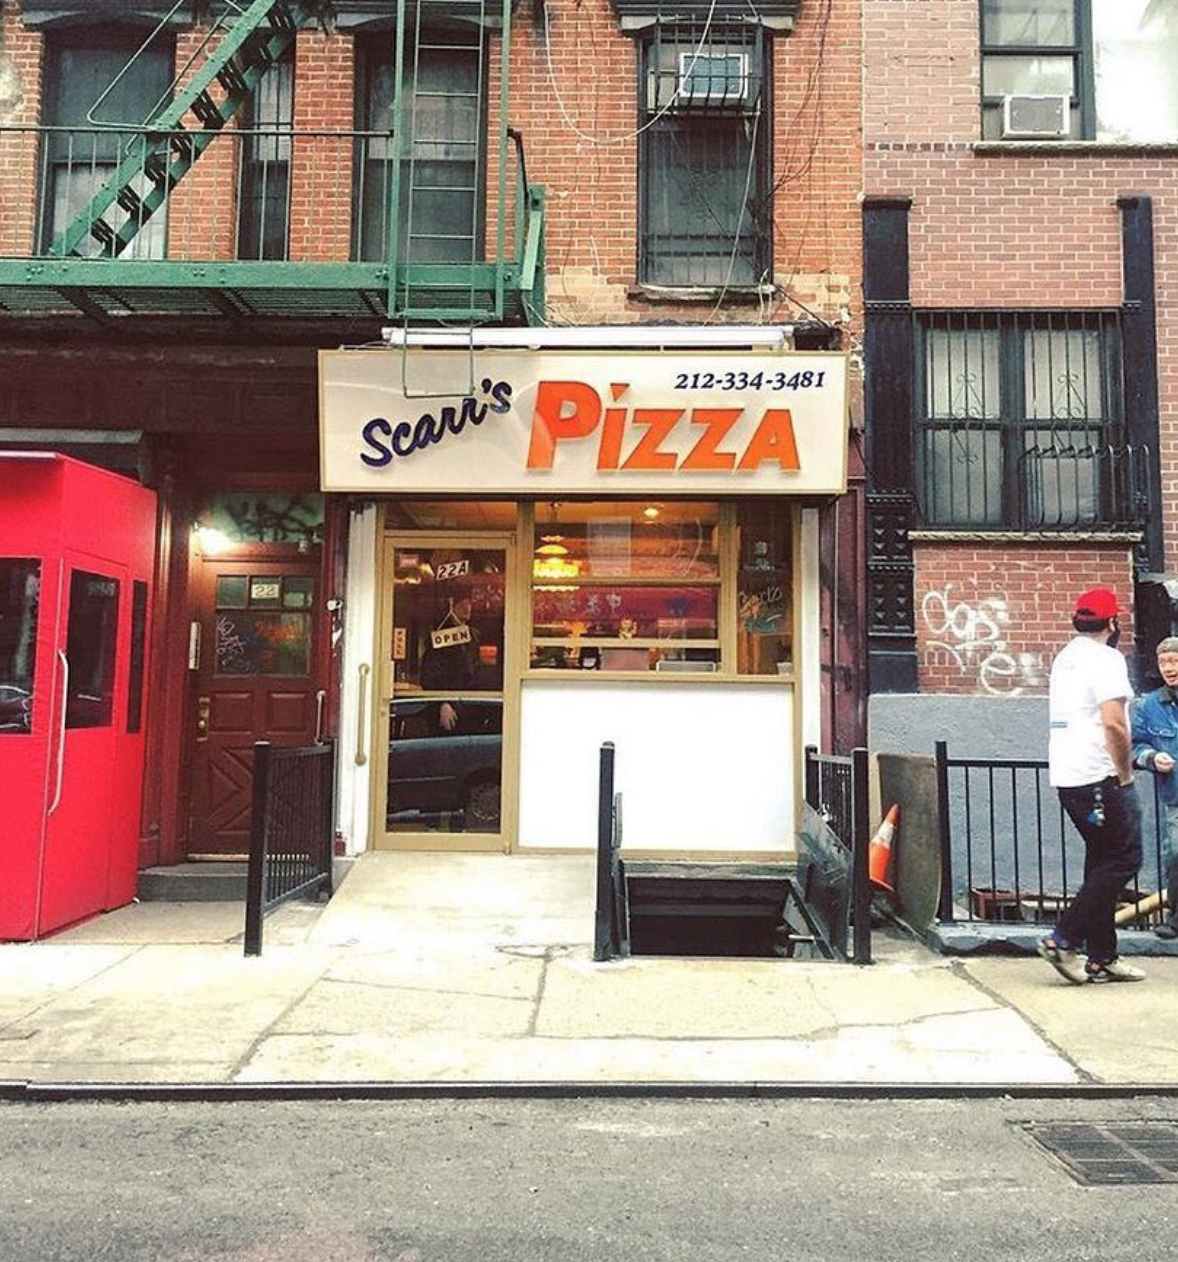 *Pre-order* The Scarr's Pizza Book: New York-Style Pizza for Everybody (Scarr Pimentel)